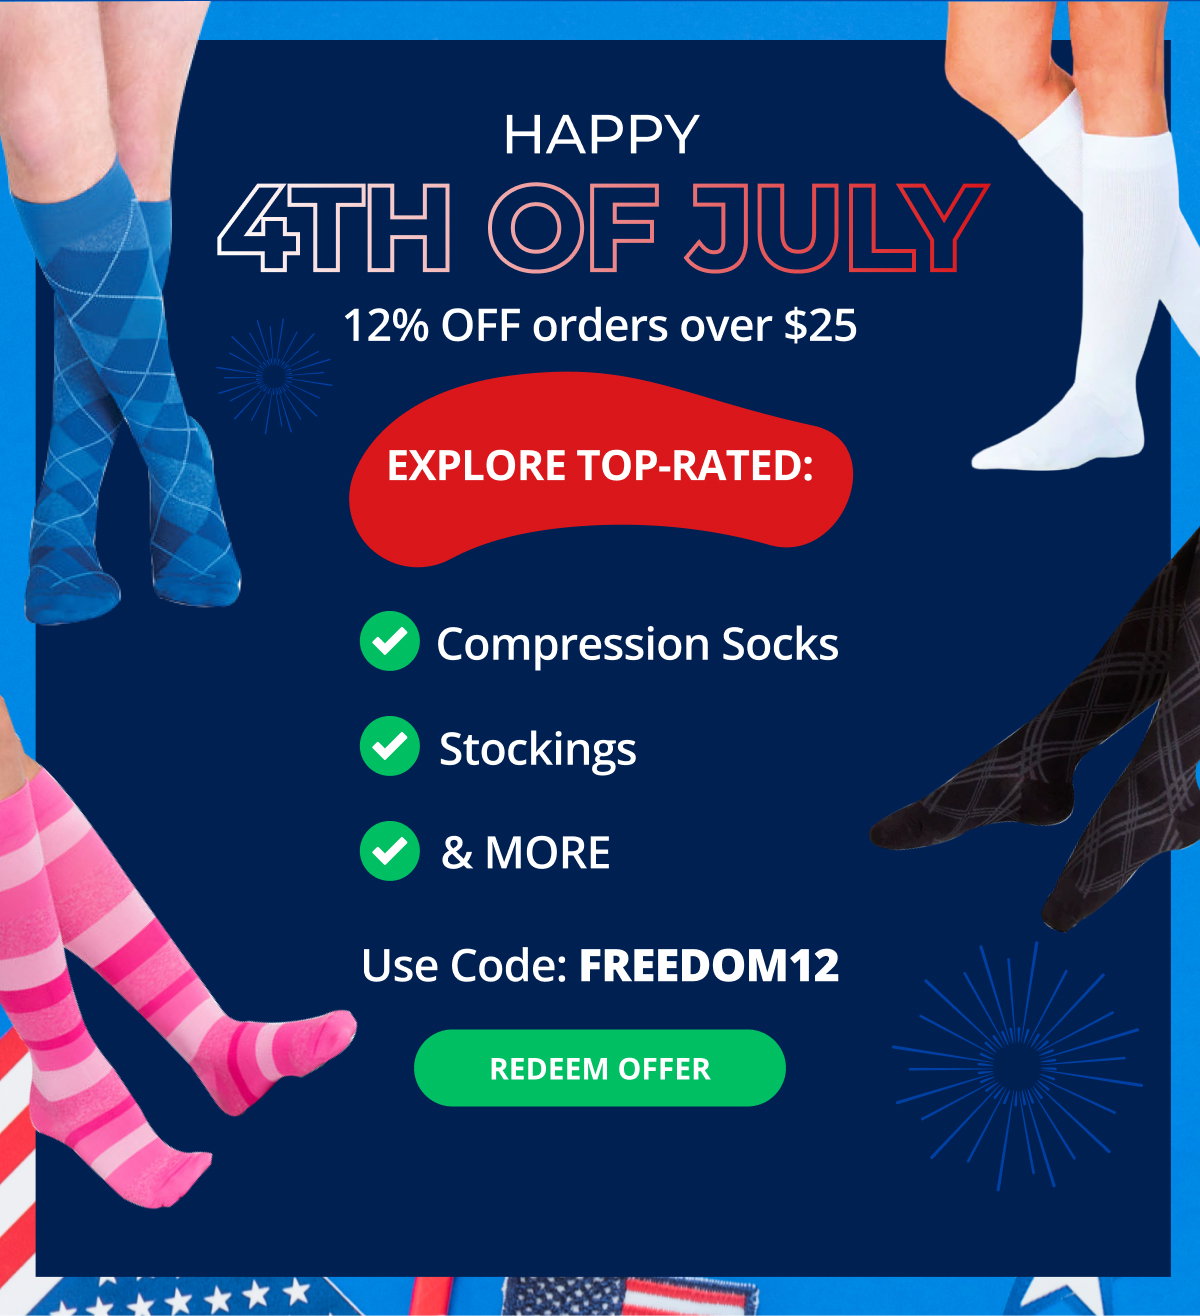 HAPPY 4TH OF JULY – 12% OFF orders over \\$25! Explore Top-Rated: Compression Socks; Stockings; & MORE! Use Code: FREEDOM12 → REDEEM OFFER